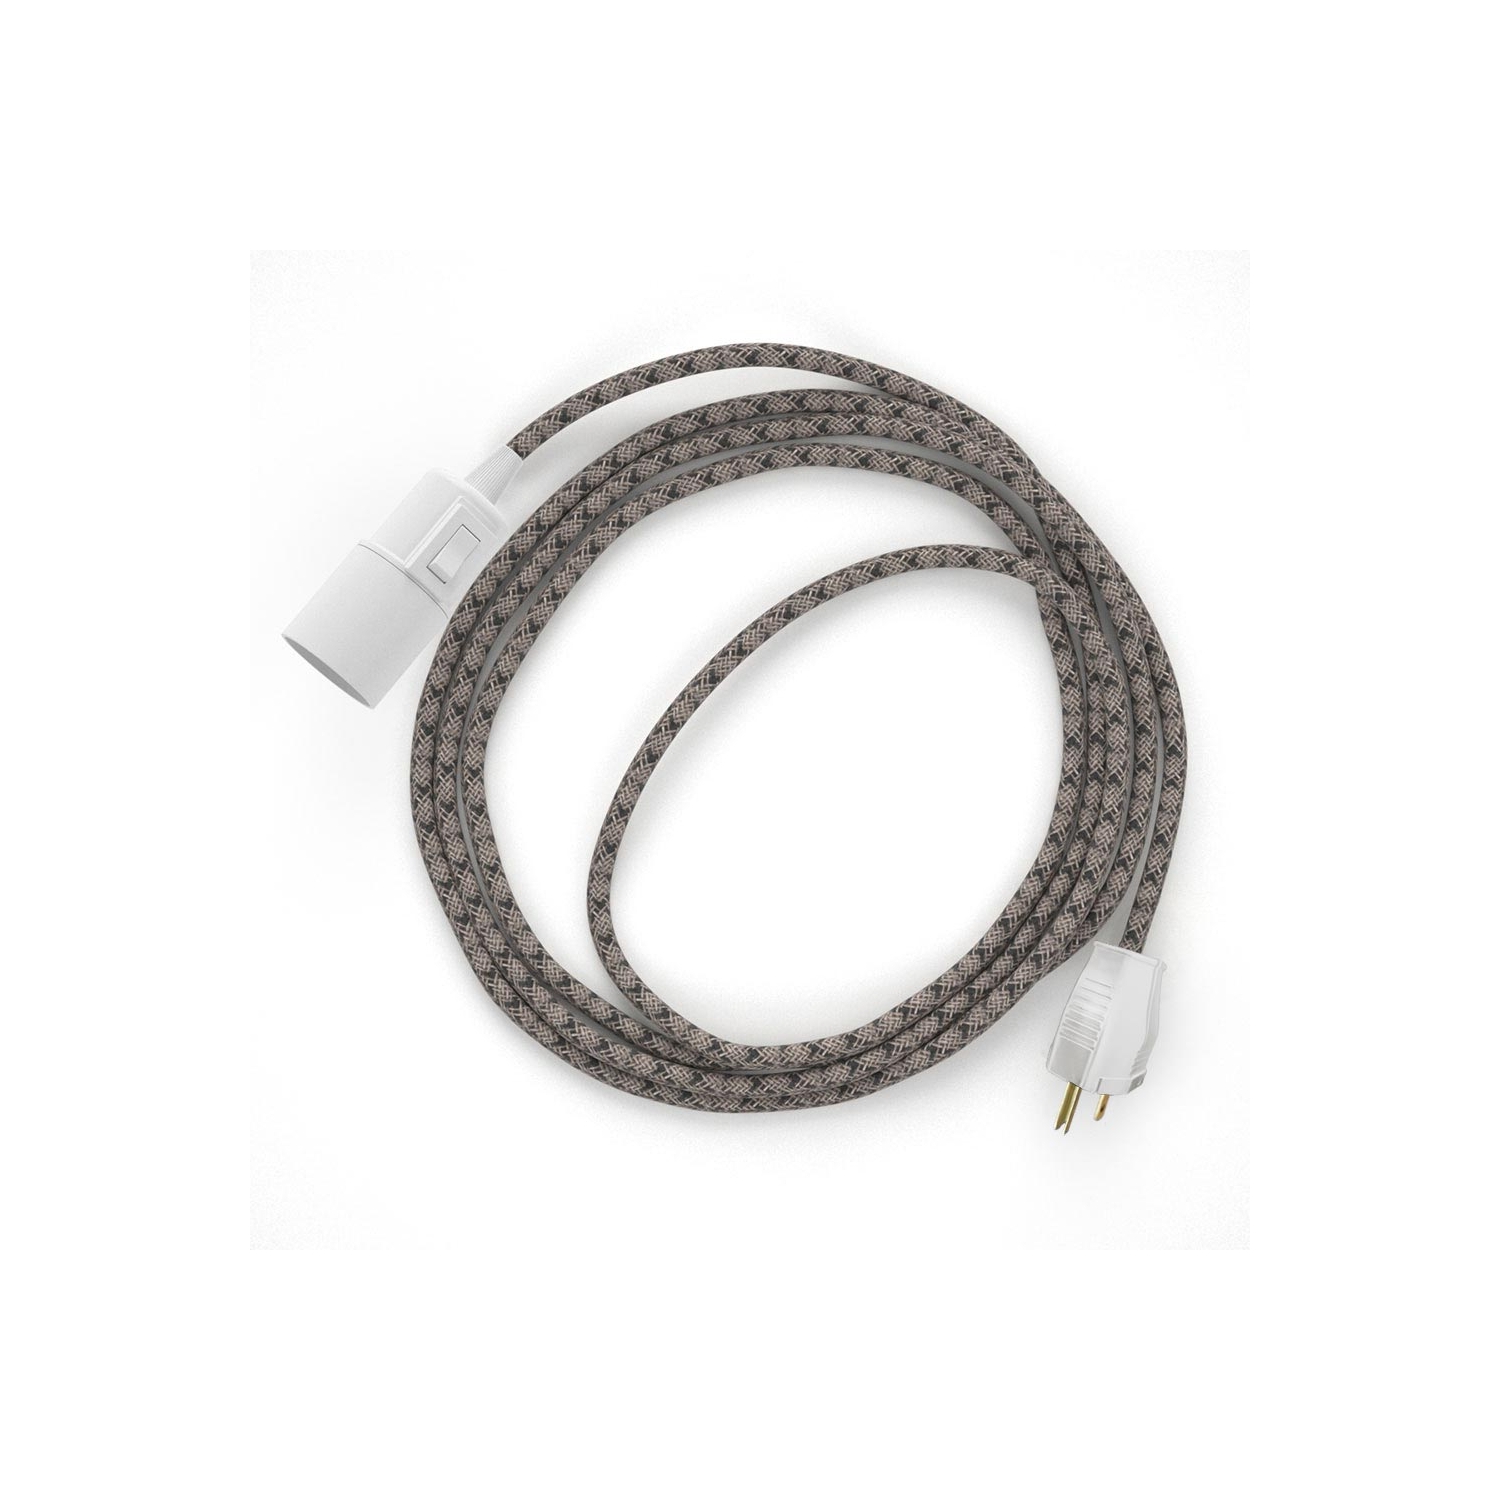 Plug-in Pendant with switch on socket | RD64 Natural & Charcoal Linen CrissCross